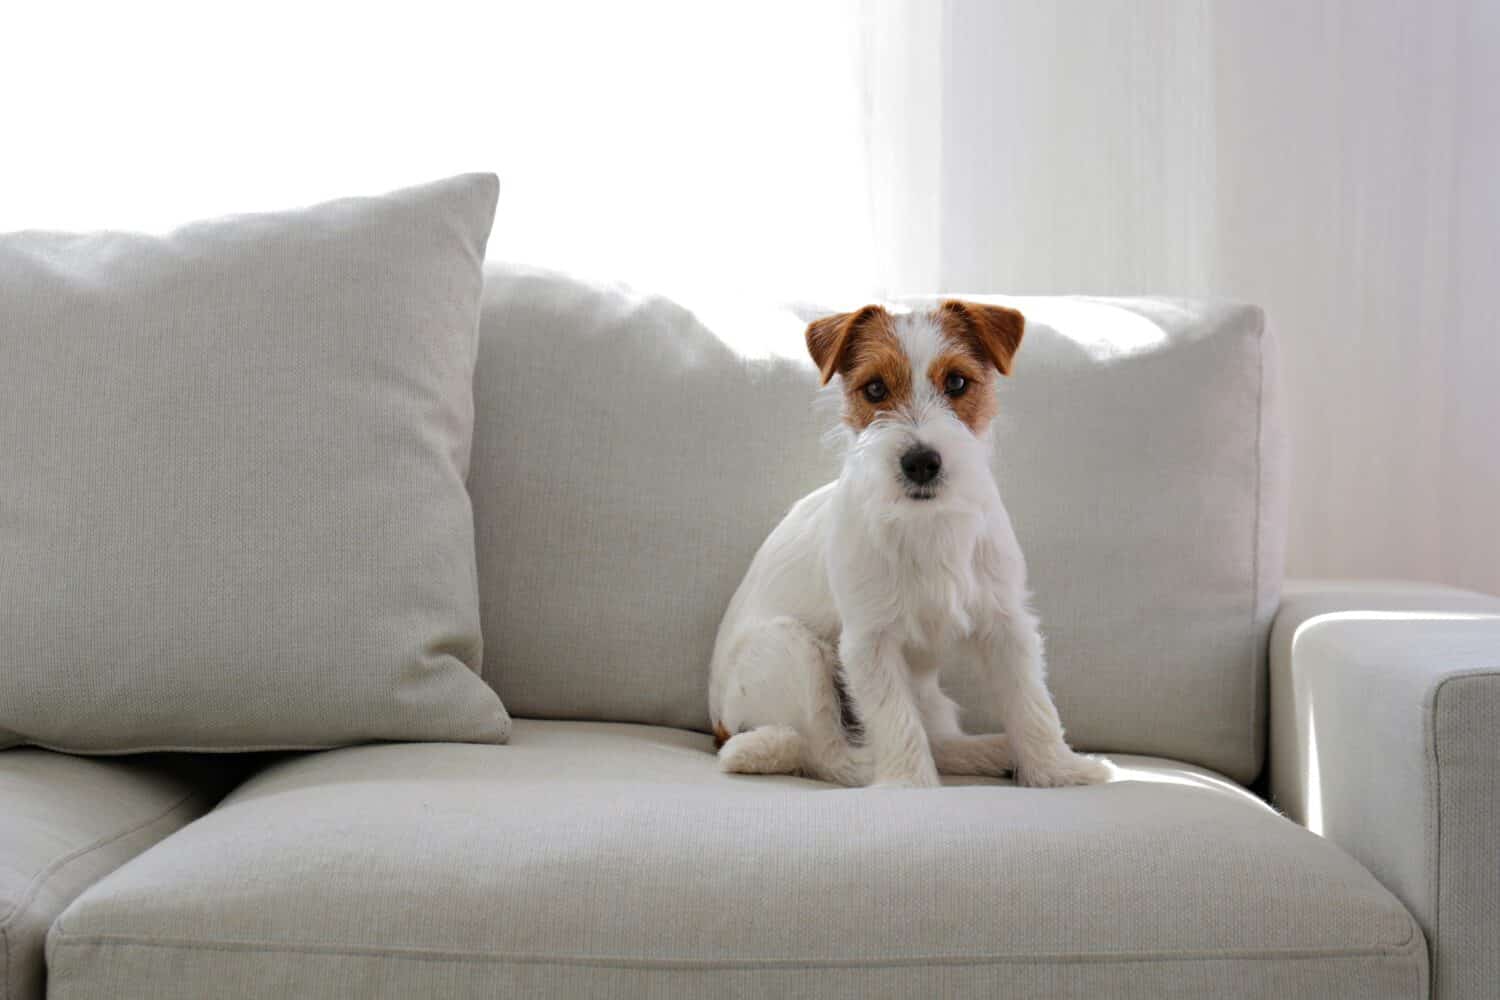 How To Clean Couch Cushions From Dog Pee